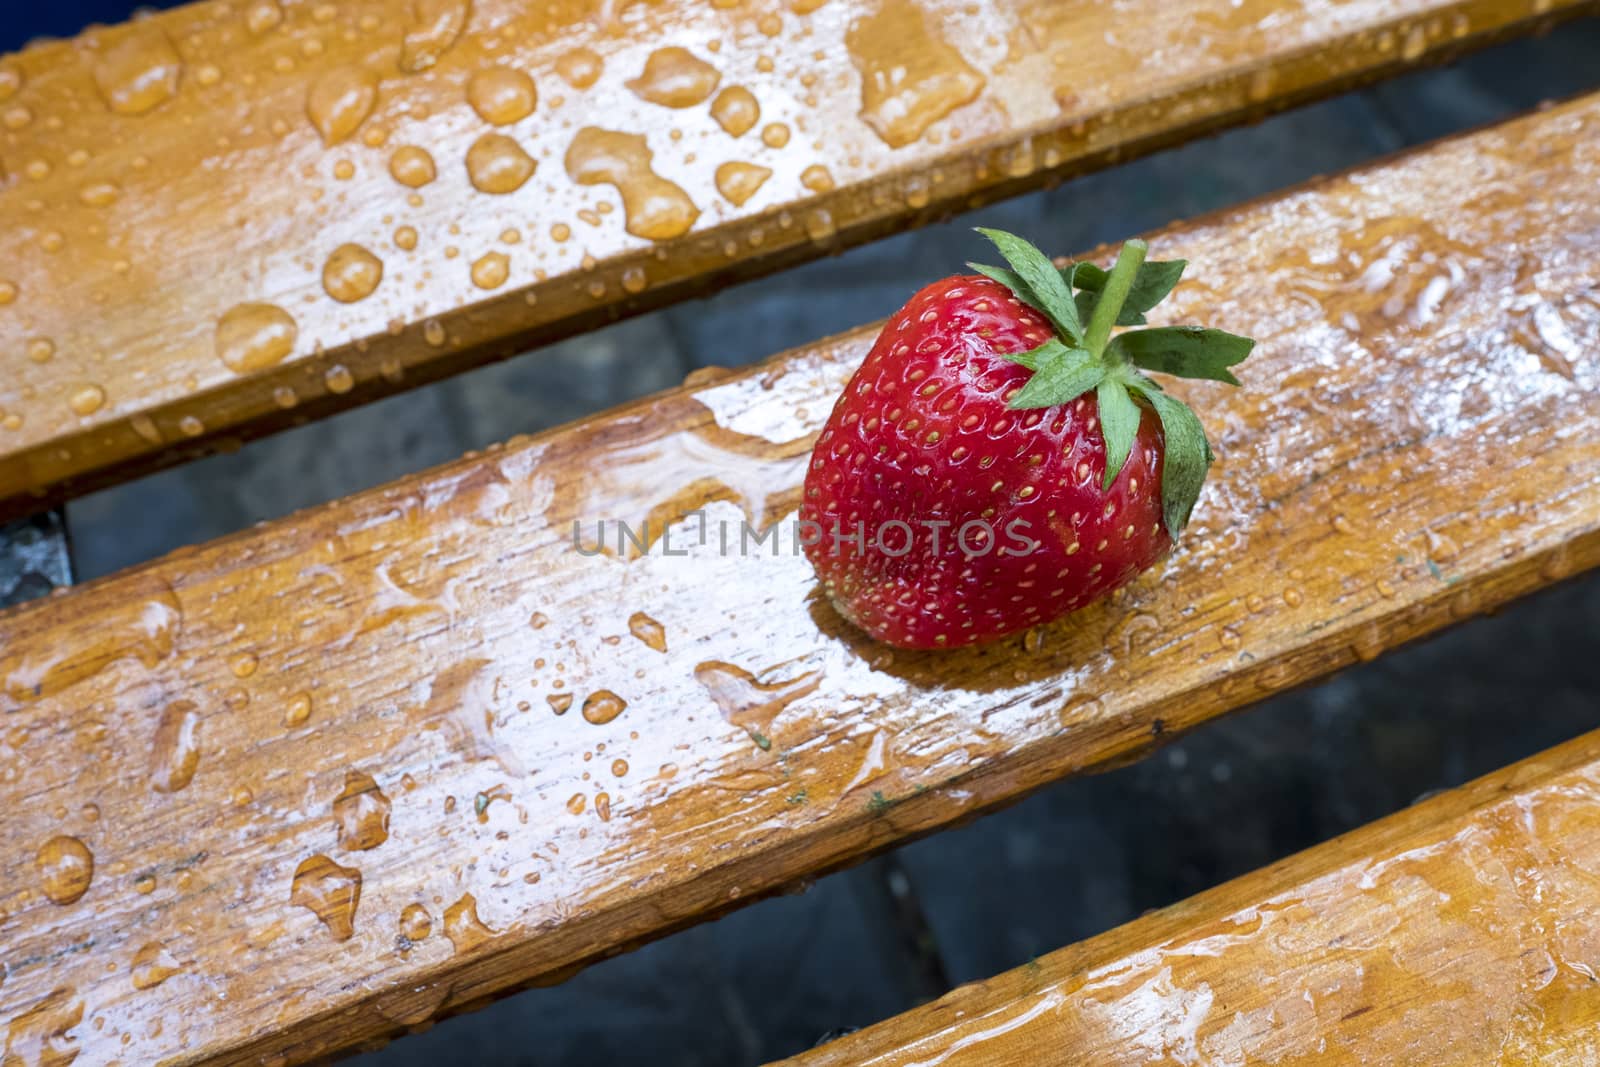 a single strawberry on a wooden bench